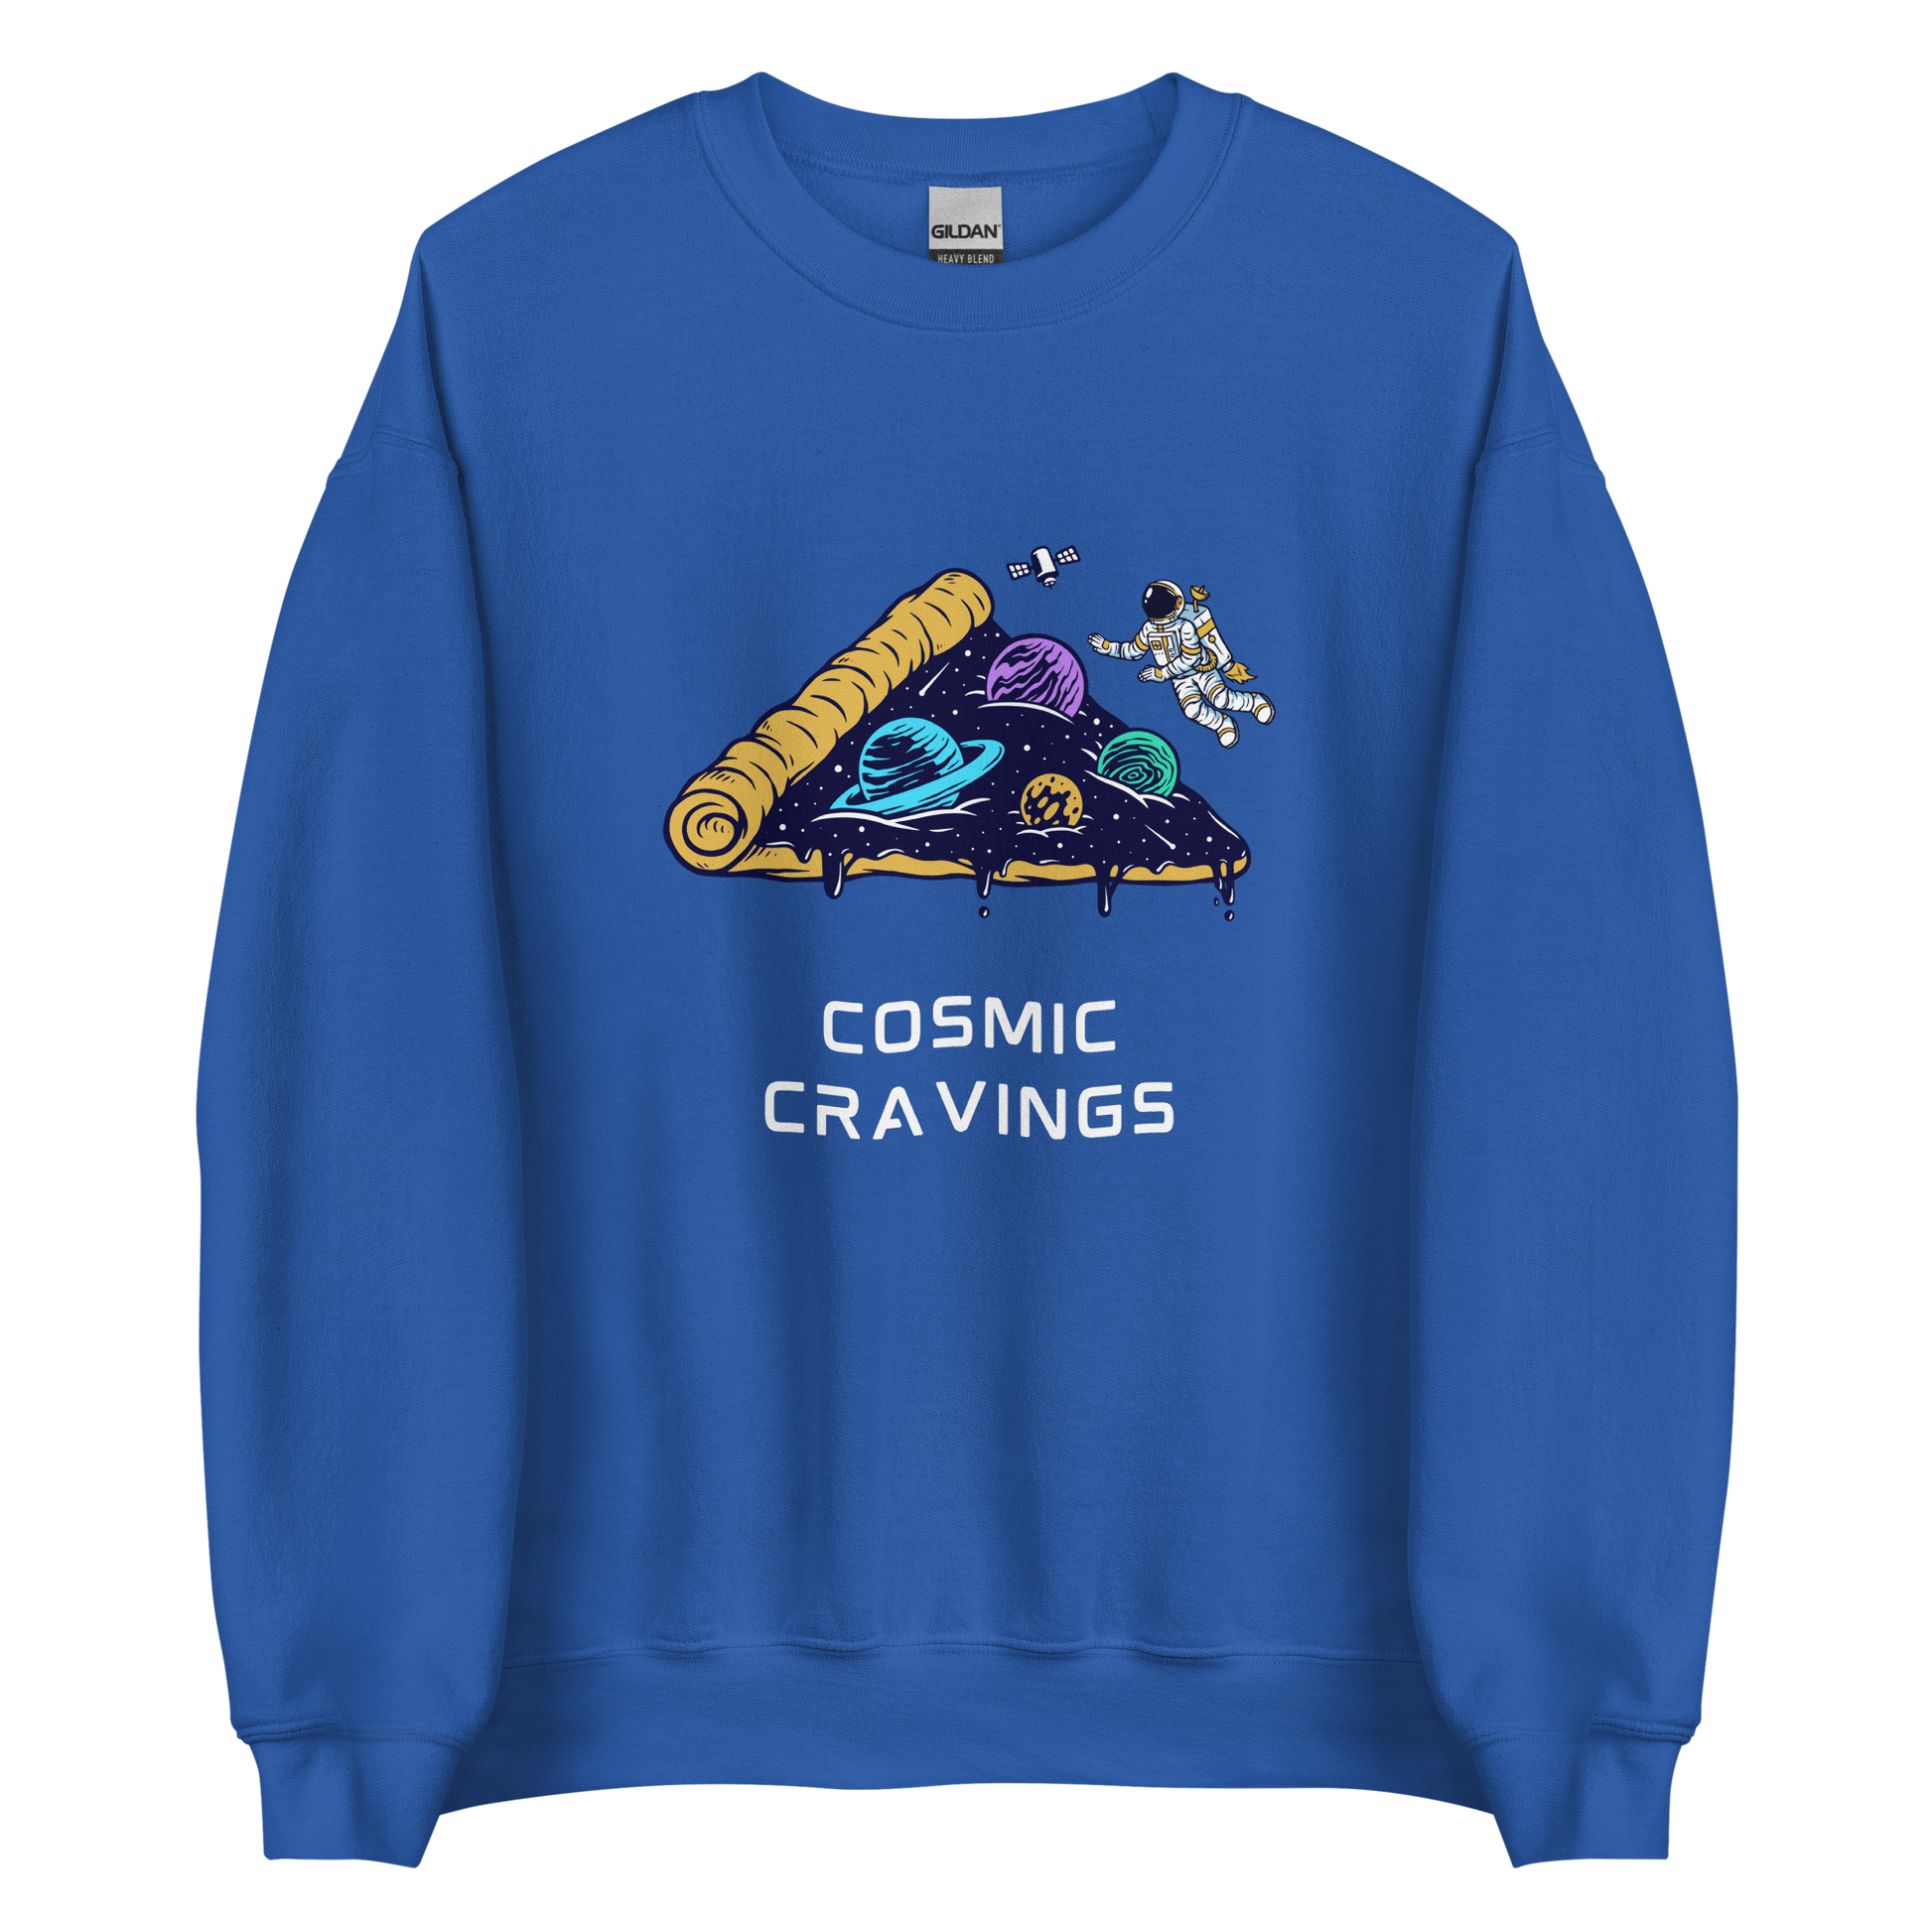 Royal Blue Cosmic Cravings Sweatshirt featuring an Astronaut Exploring a Pizza Universe graphic on the chest - Funny Graphic Space Sweatshirts - Boozy Fox